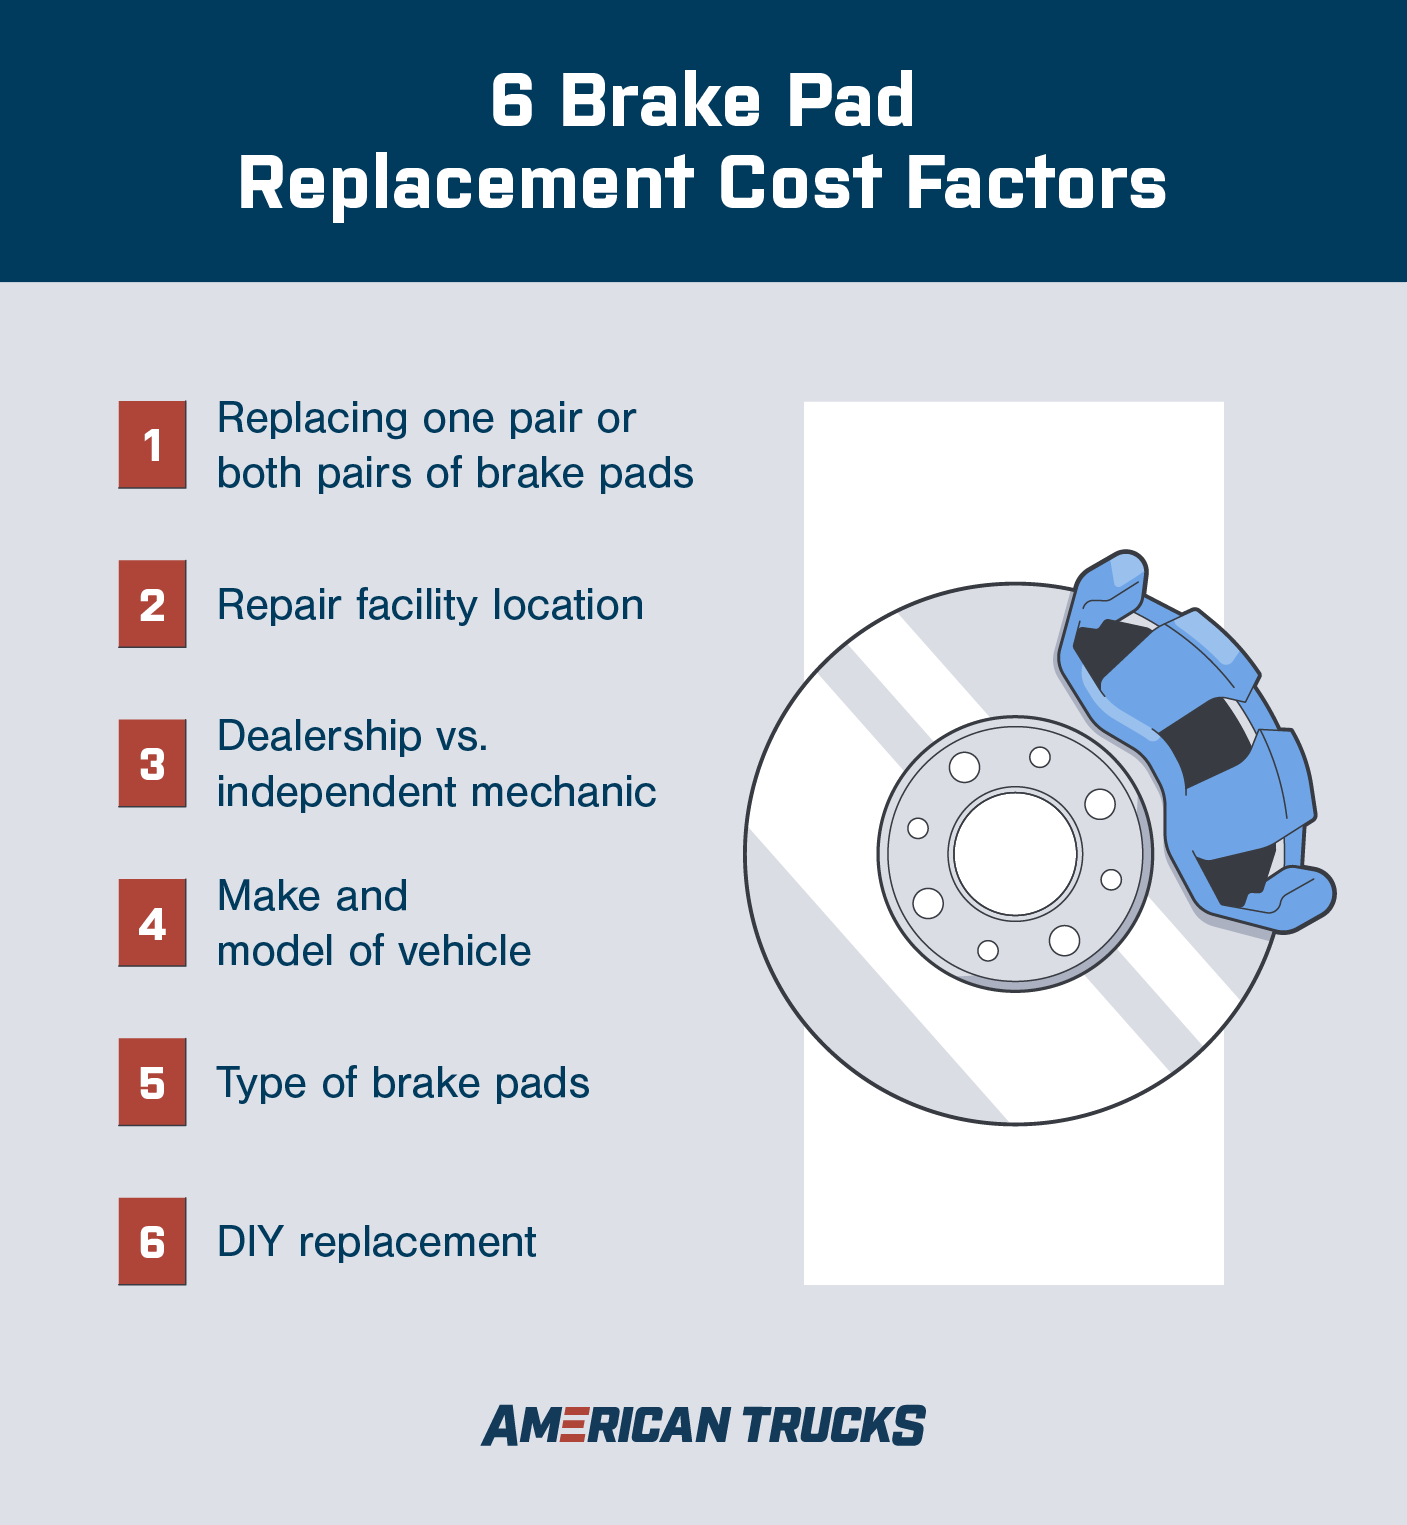 Graphic showing 6 brake pad replacement cost factors